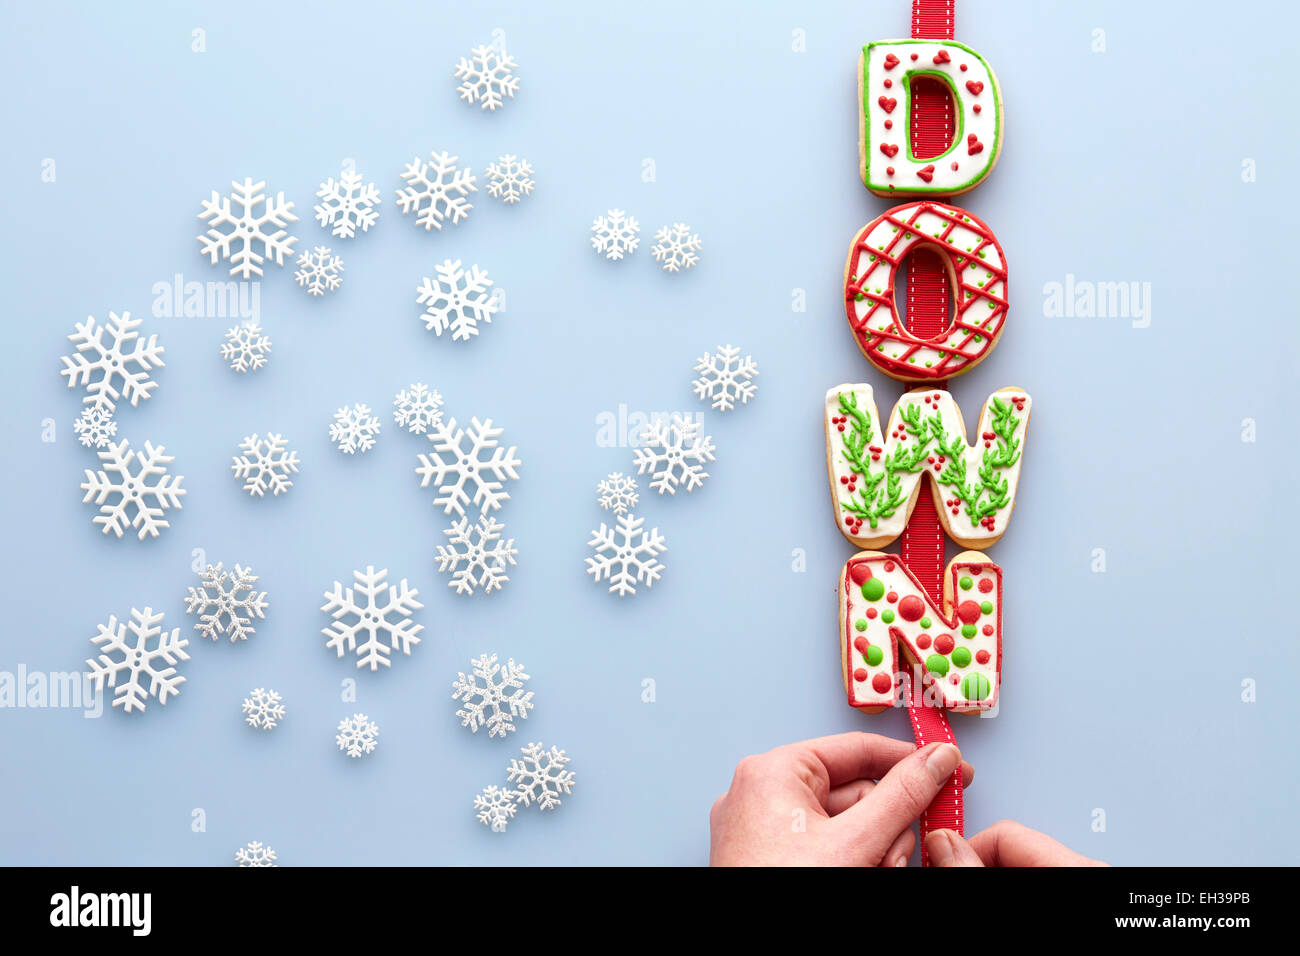 Overhead View of Decorated Christmas Cookies spelling DOWN on Blue Background with Snowflakes Stock Photo